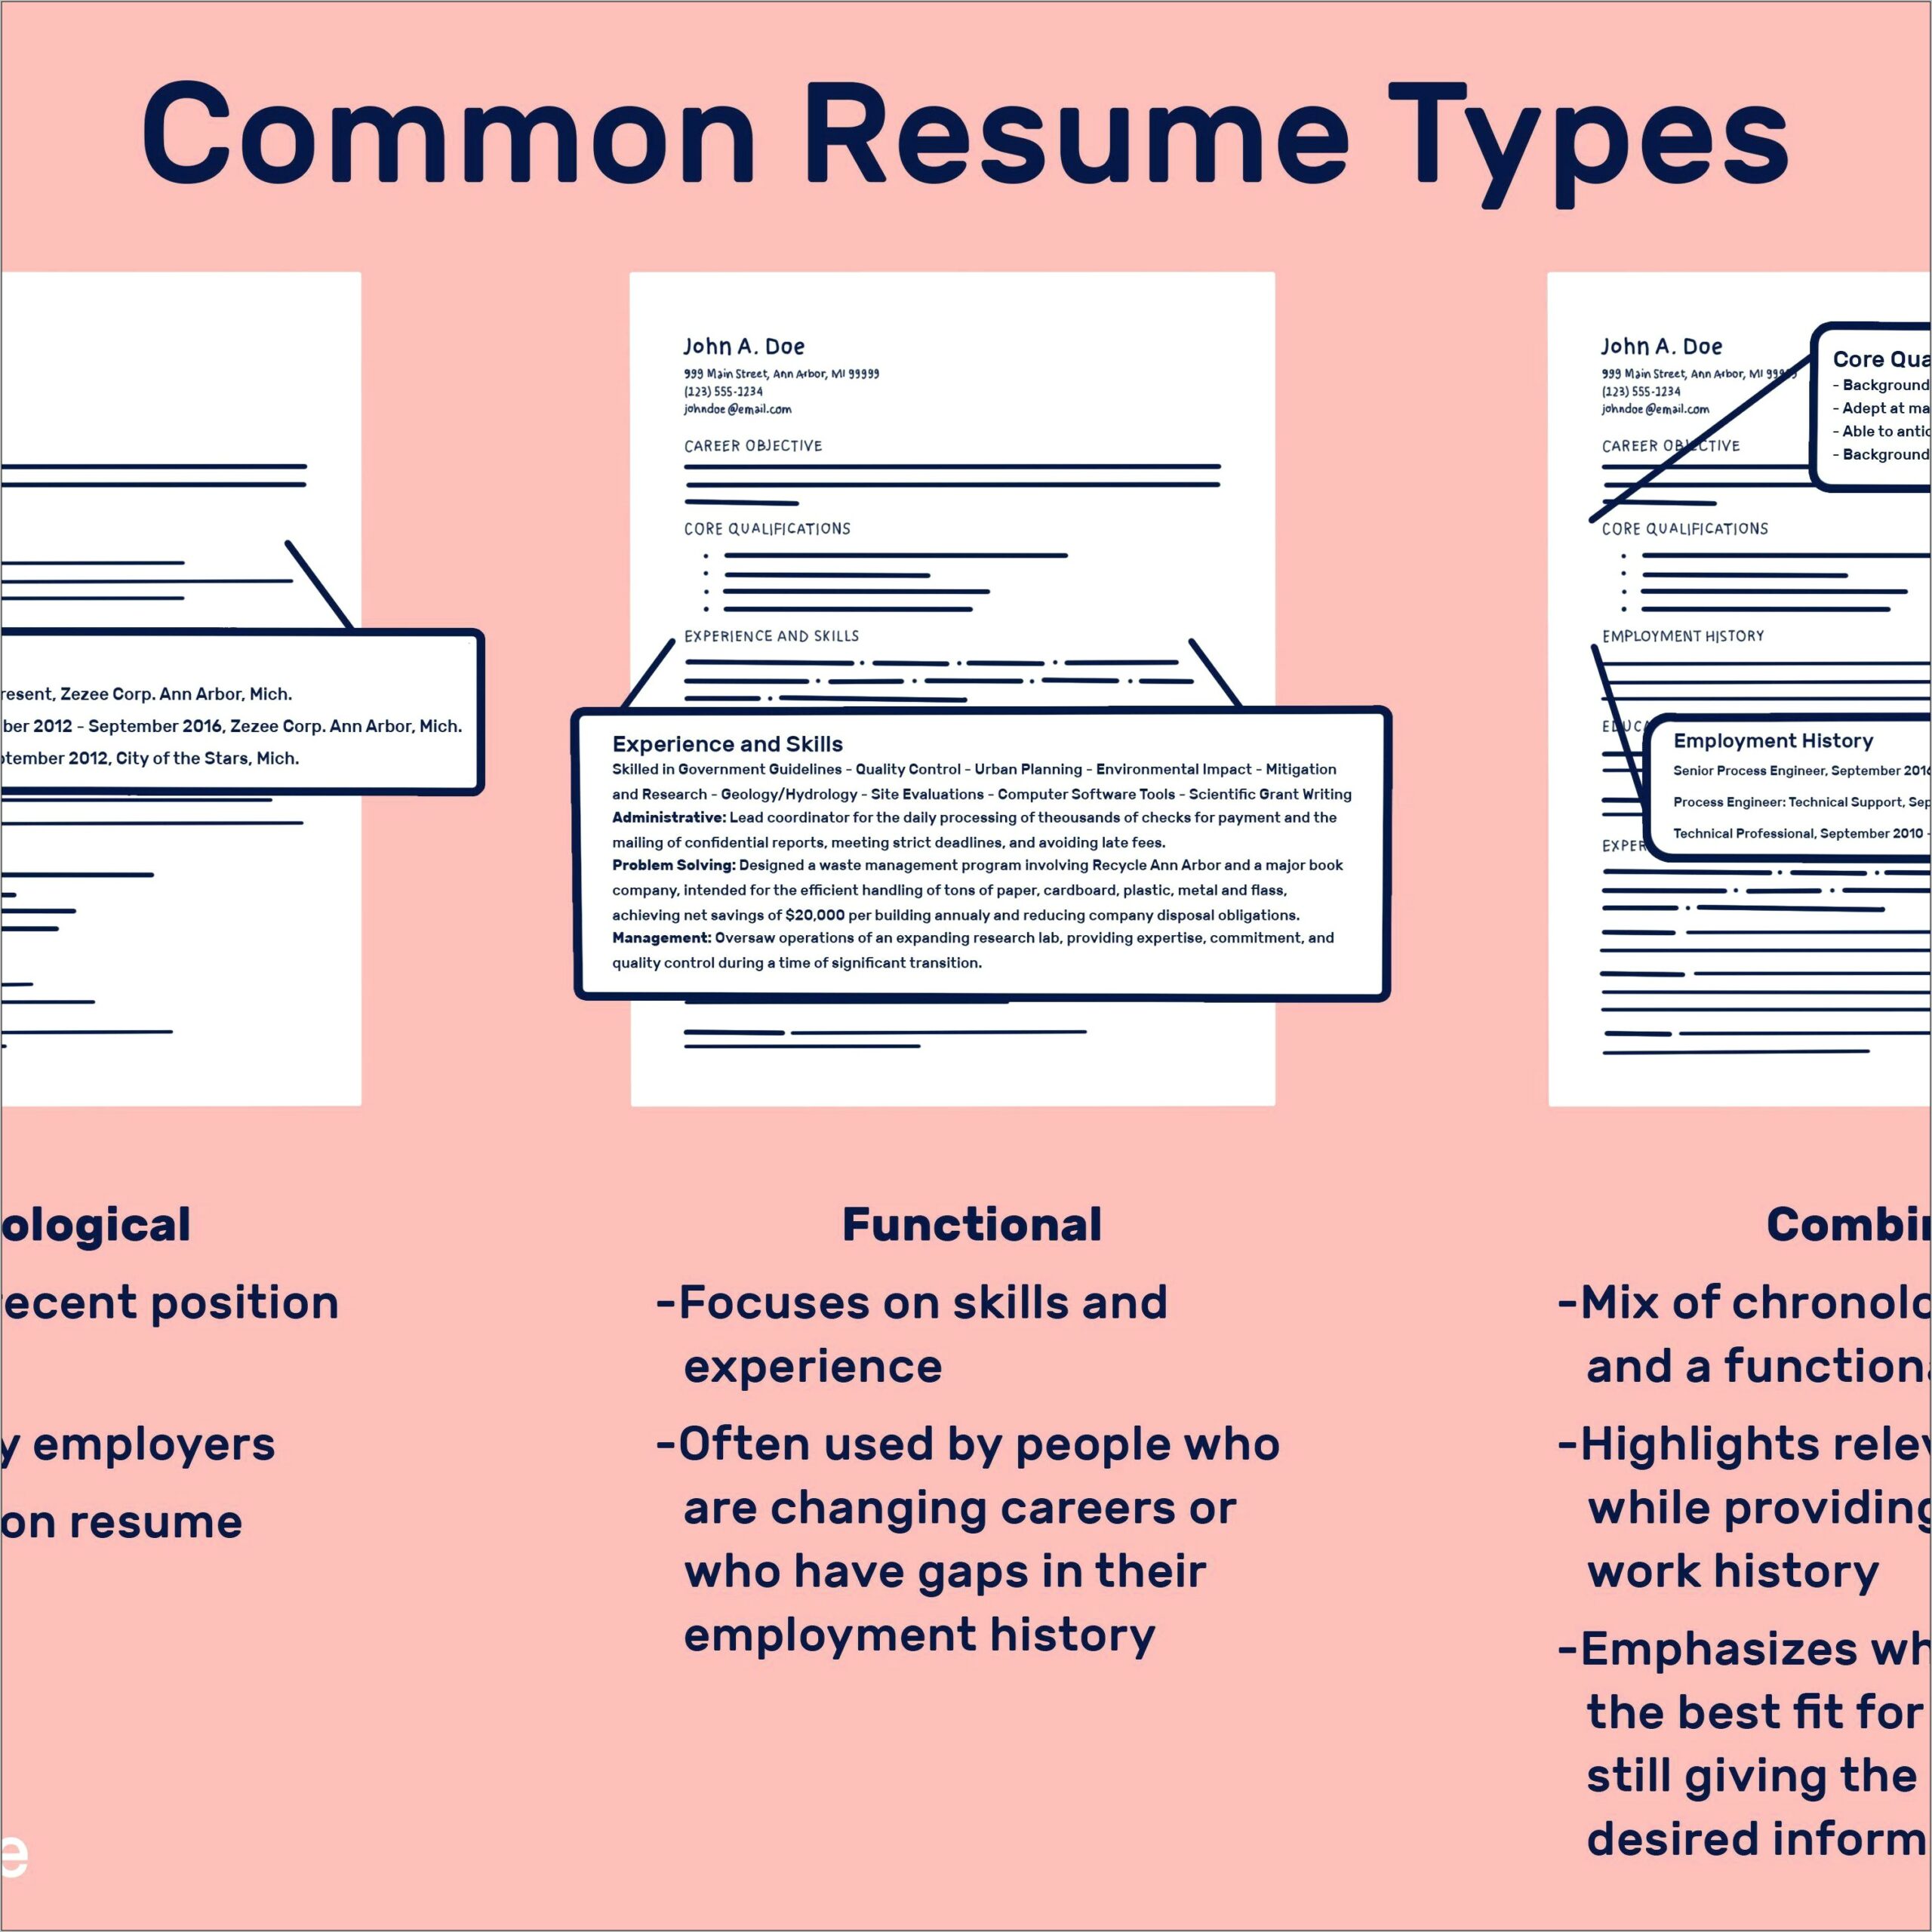 Many Jobs At The Same Employer Resume